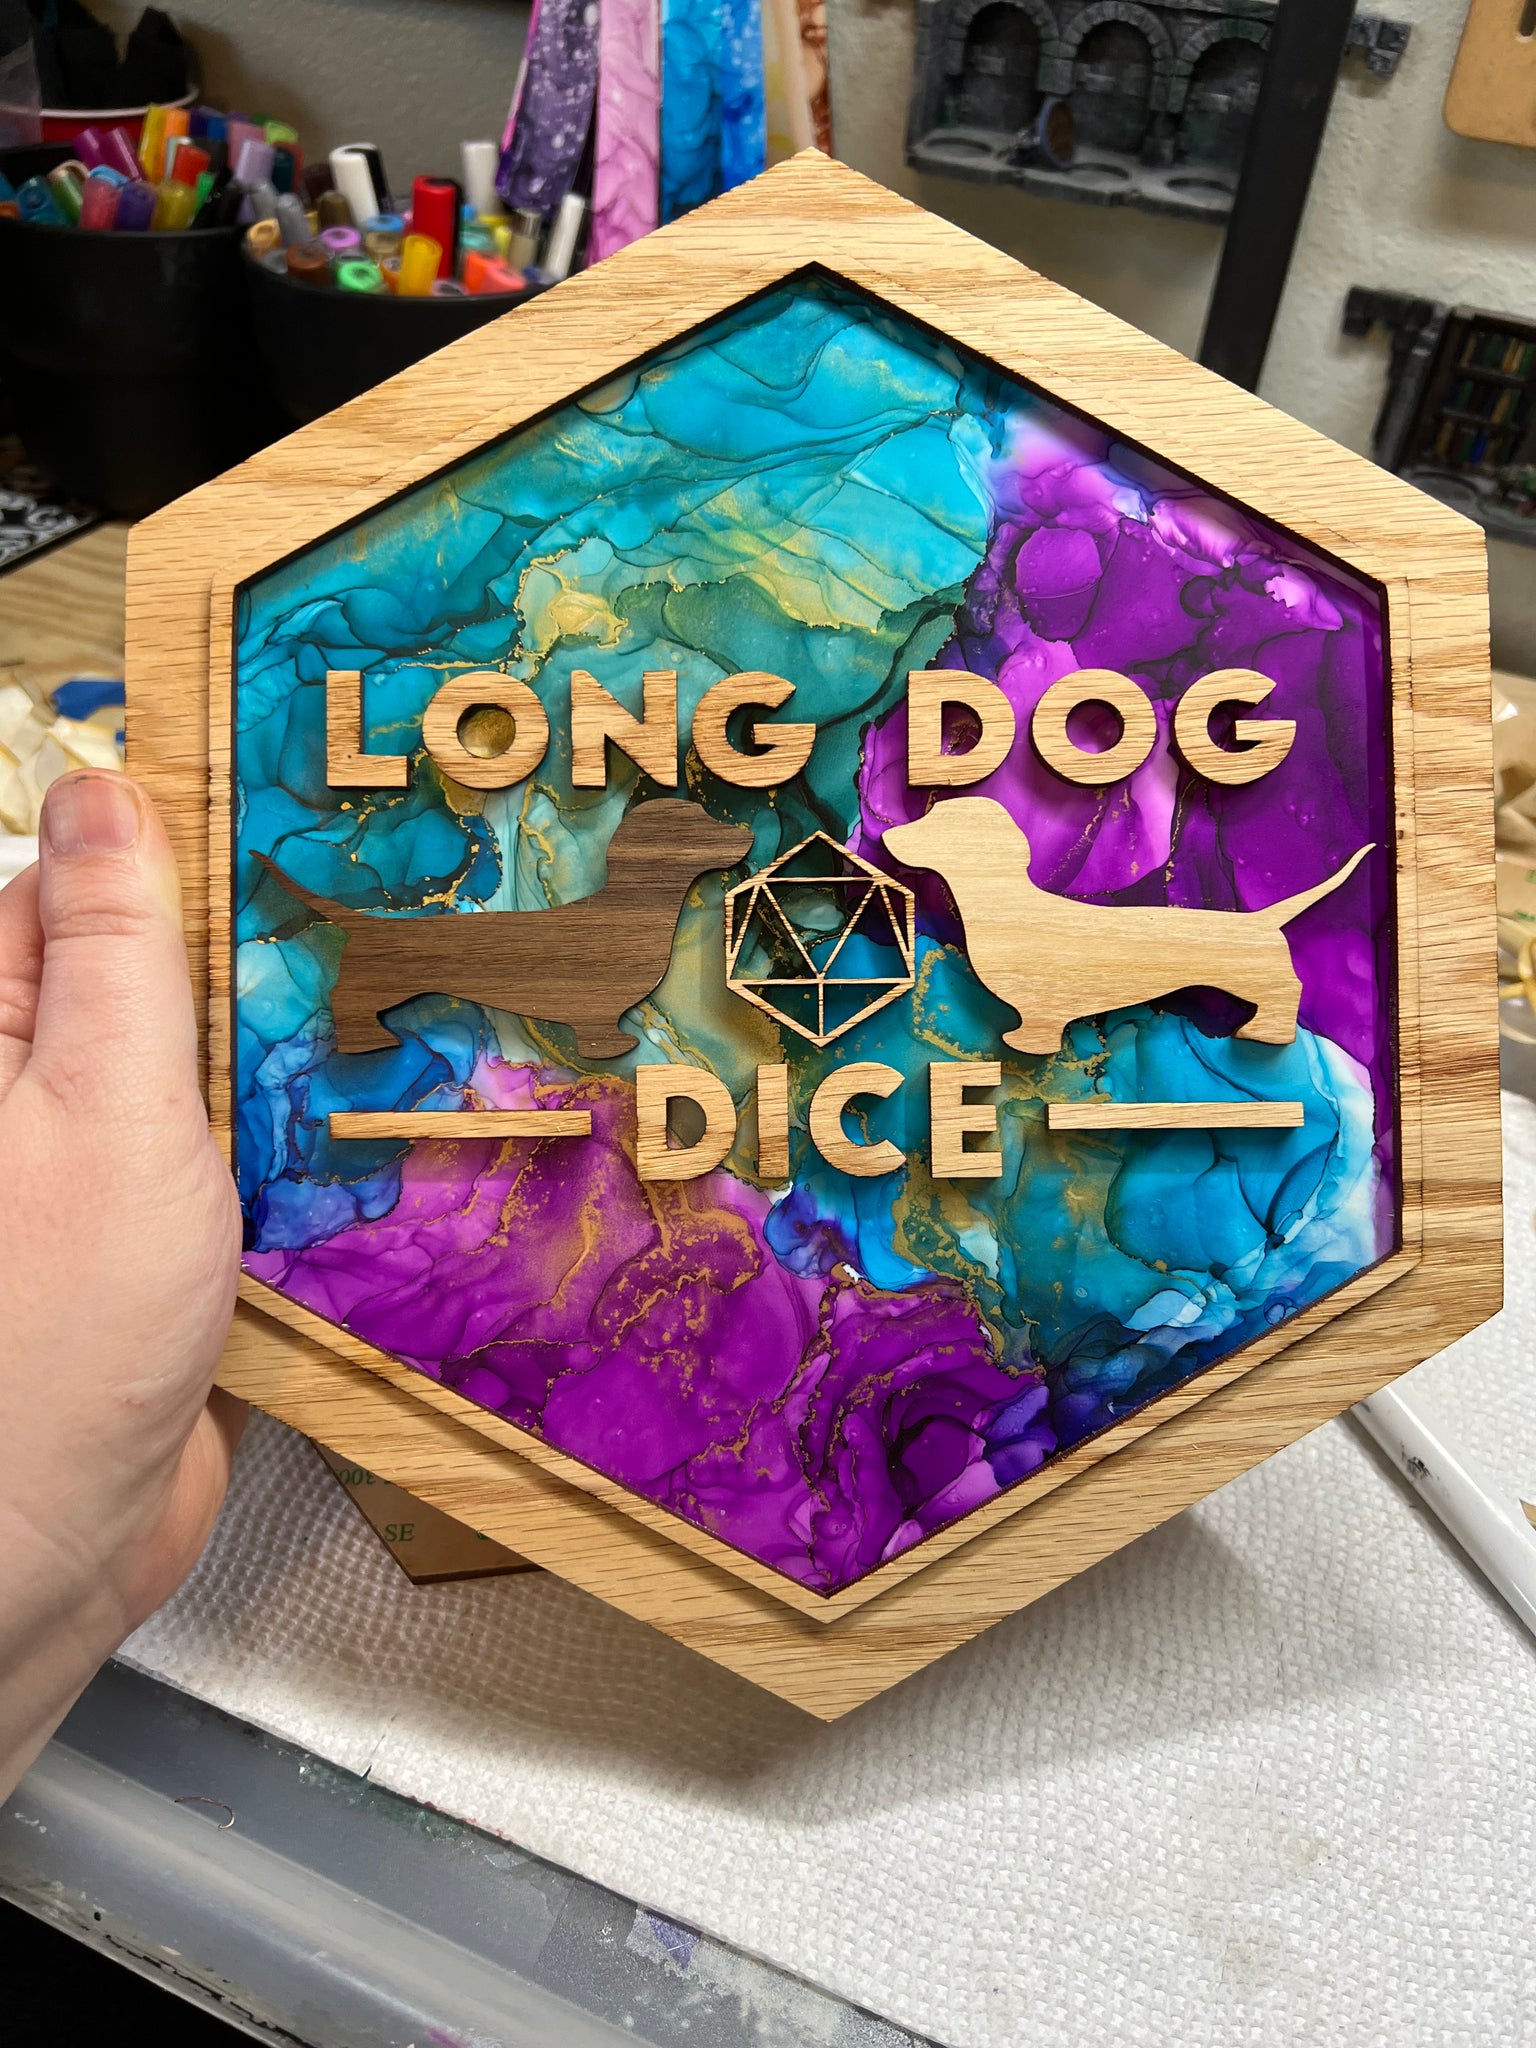 Long Dog Dice sign and wholesale